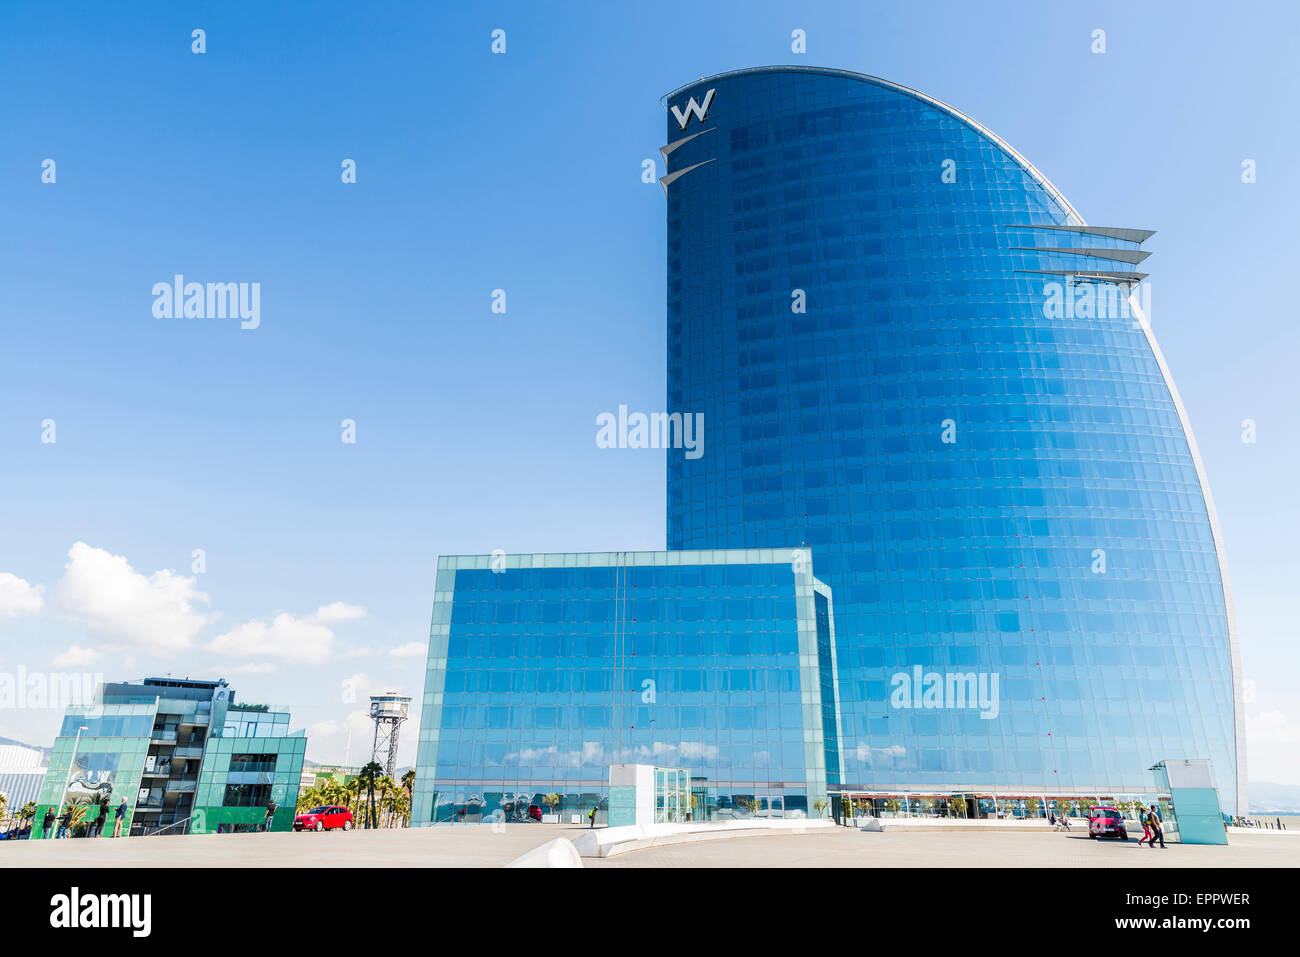 W Barcelona hotel, also known as the Hotel vela "sail hotel", located on  the new entrance of Barcelona's Port Stock Photo - Alamy